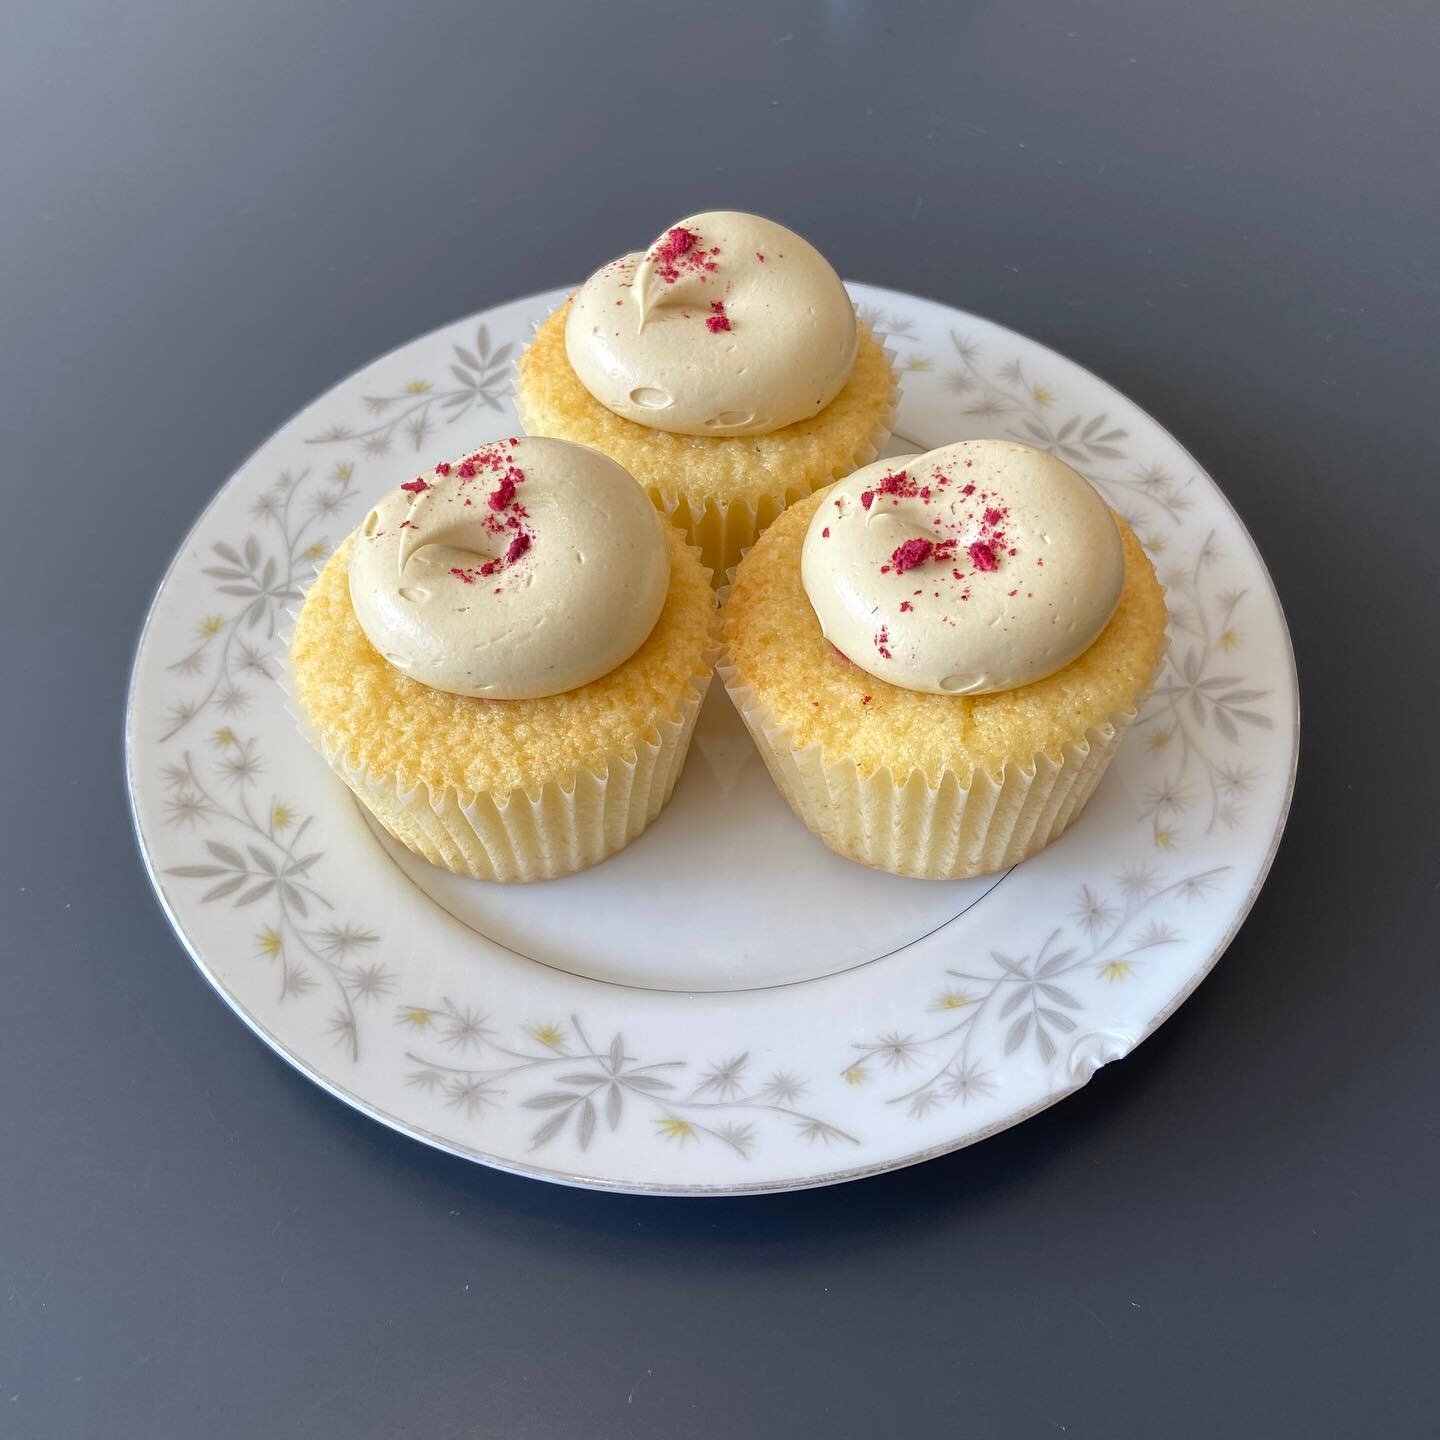 This weekend&rsquo;s special: Vanilla Raspberry Pistachio! Vanilla cupcakes filled with raspberry preserves, frosted with pistachio buttercream and topped with crushed dried raspberries. Get some while you can!